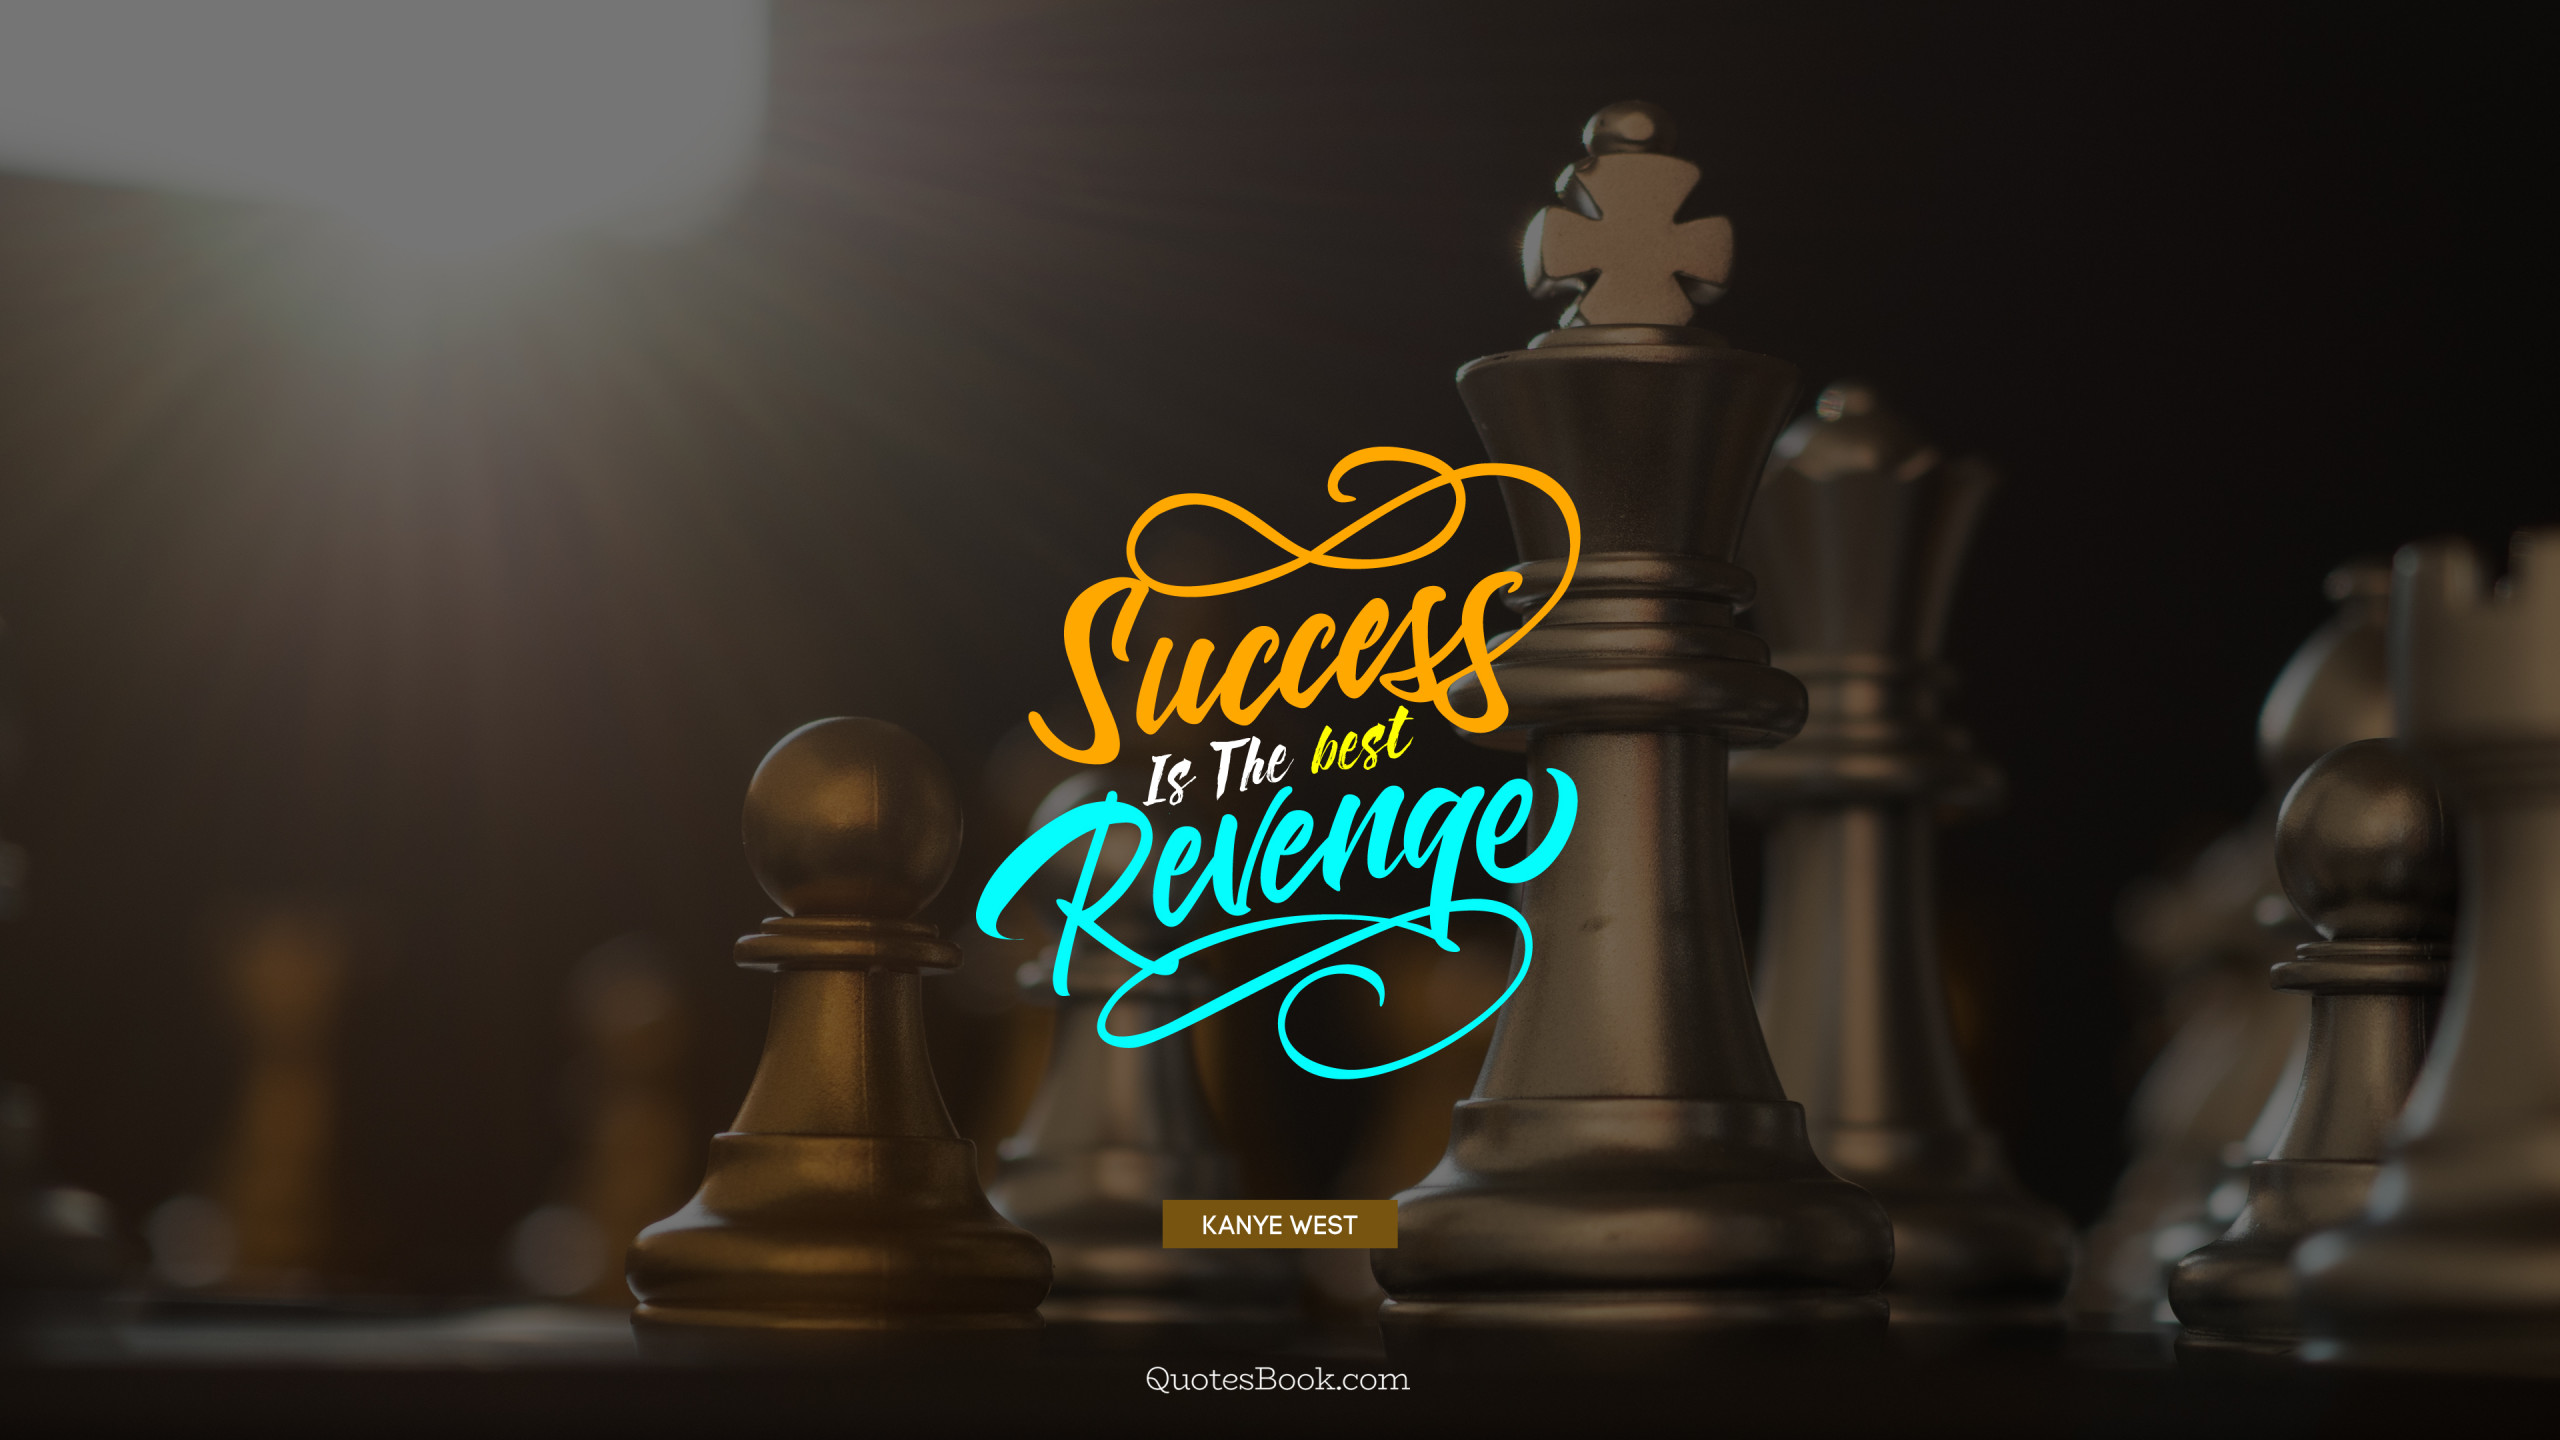 Success is the best revenge. - Quote by Kanye West - QuotesBook